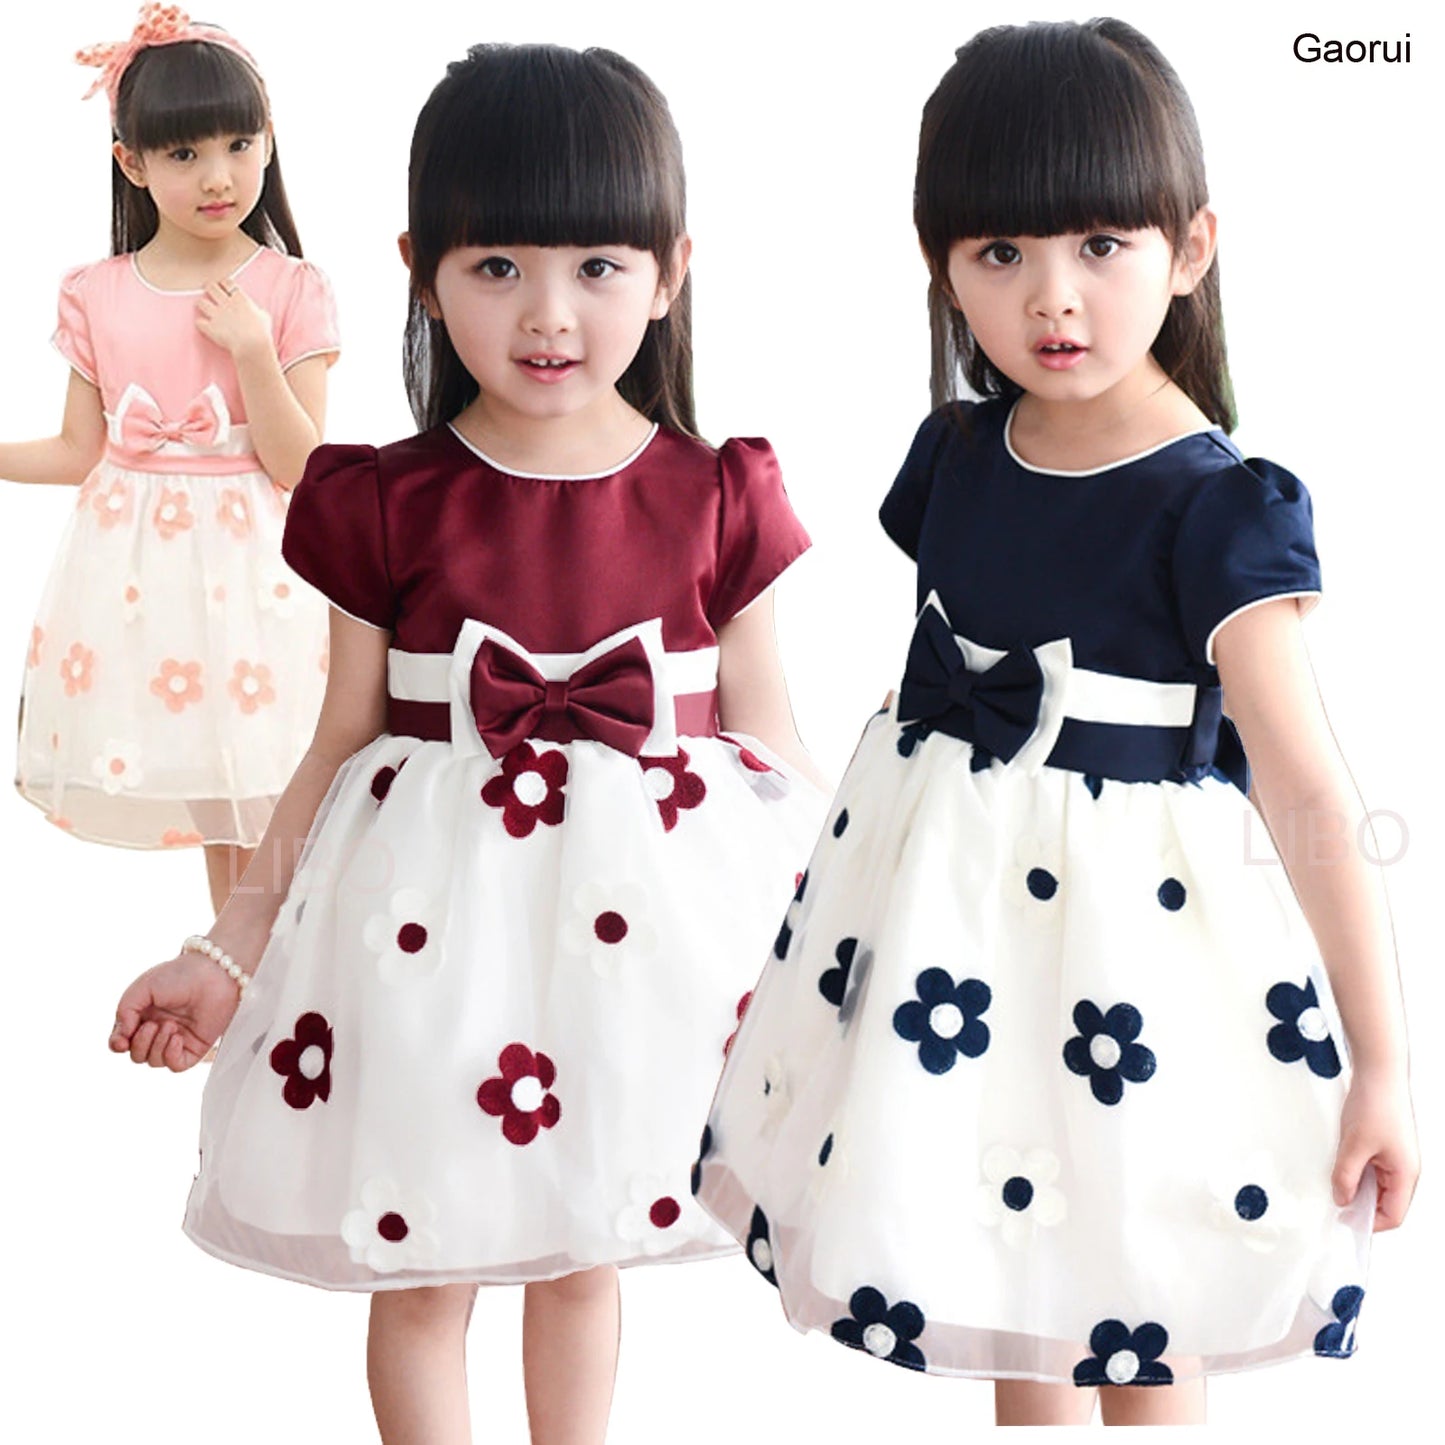 2019 Summer New Kids Clothes Baby Girls Princess Dress Floral Short Sleeve Children Clothing Bow Voile party Girls Dress Present